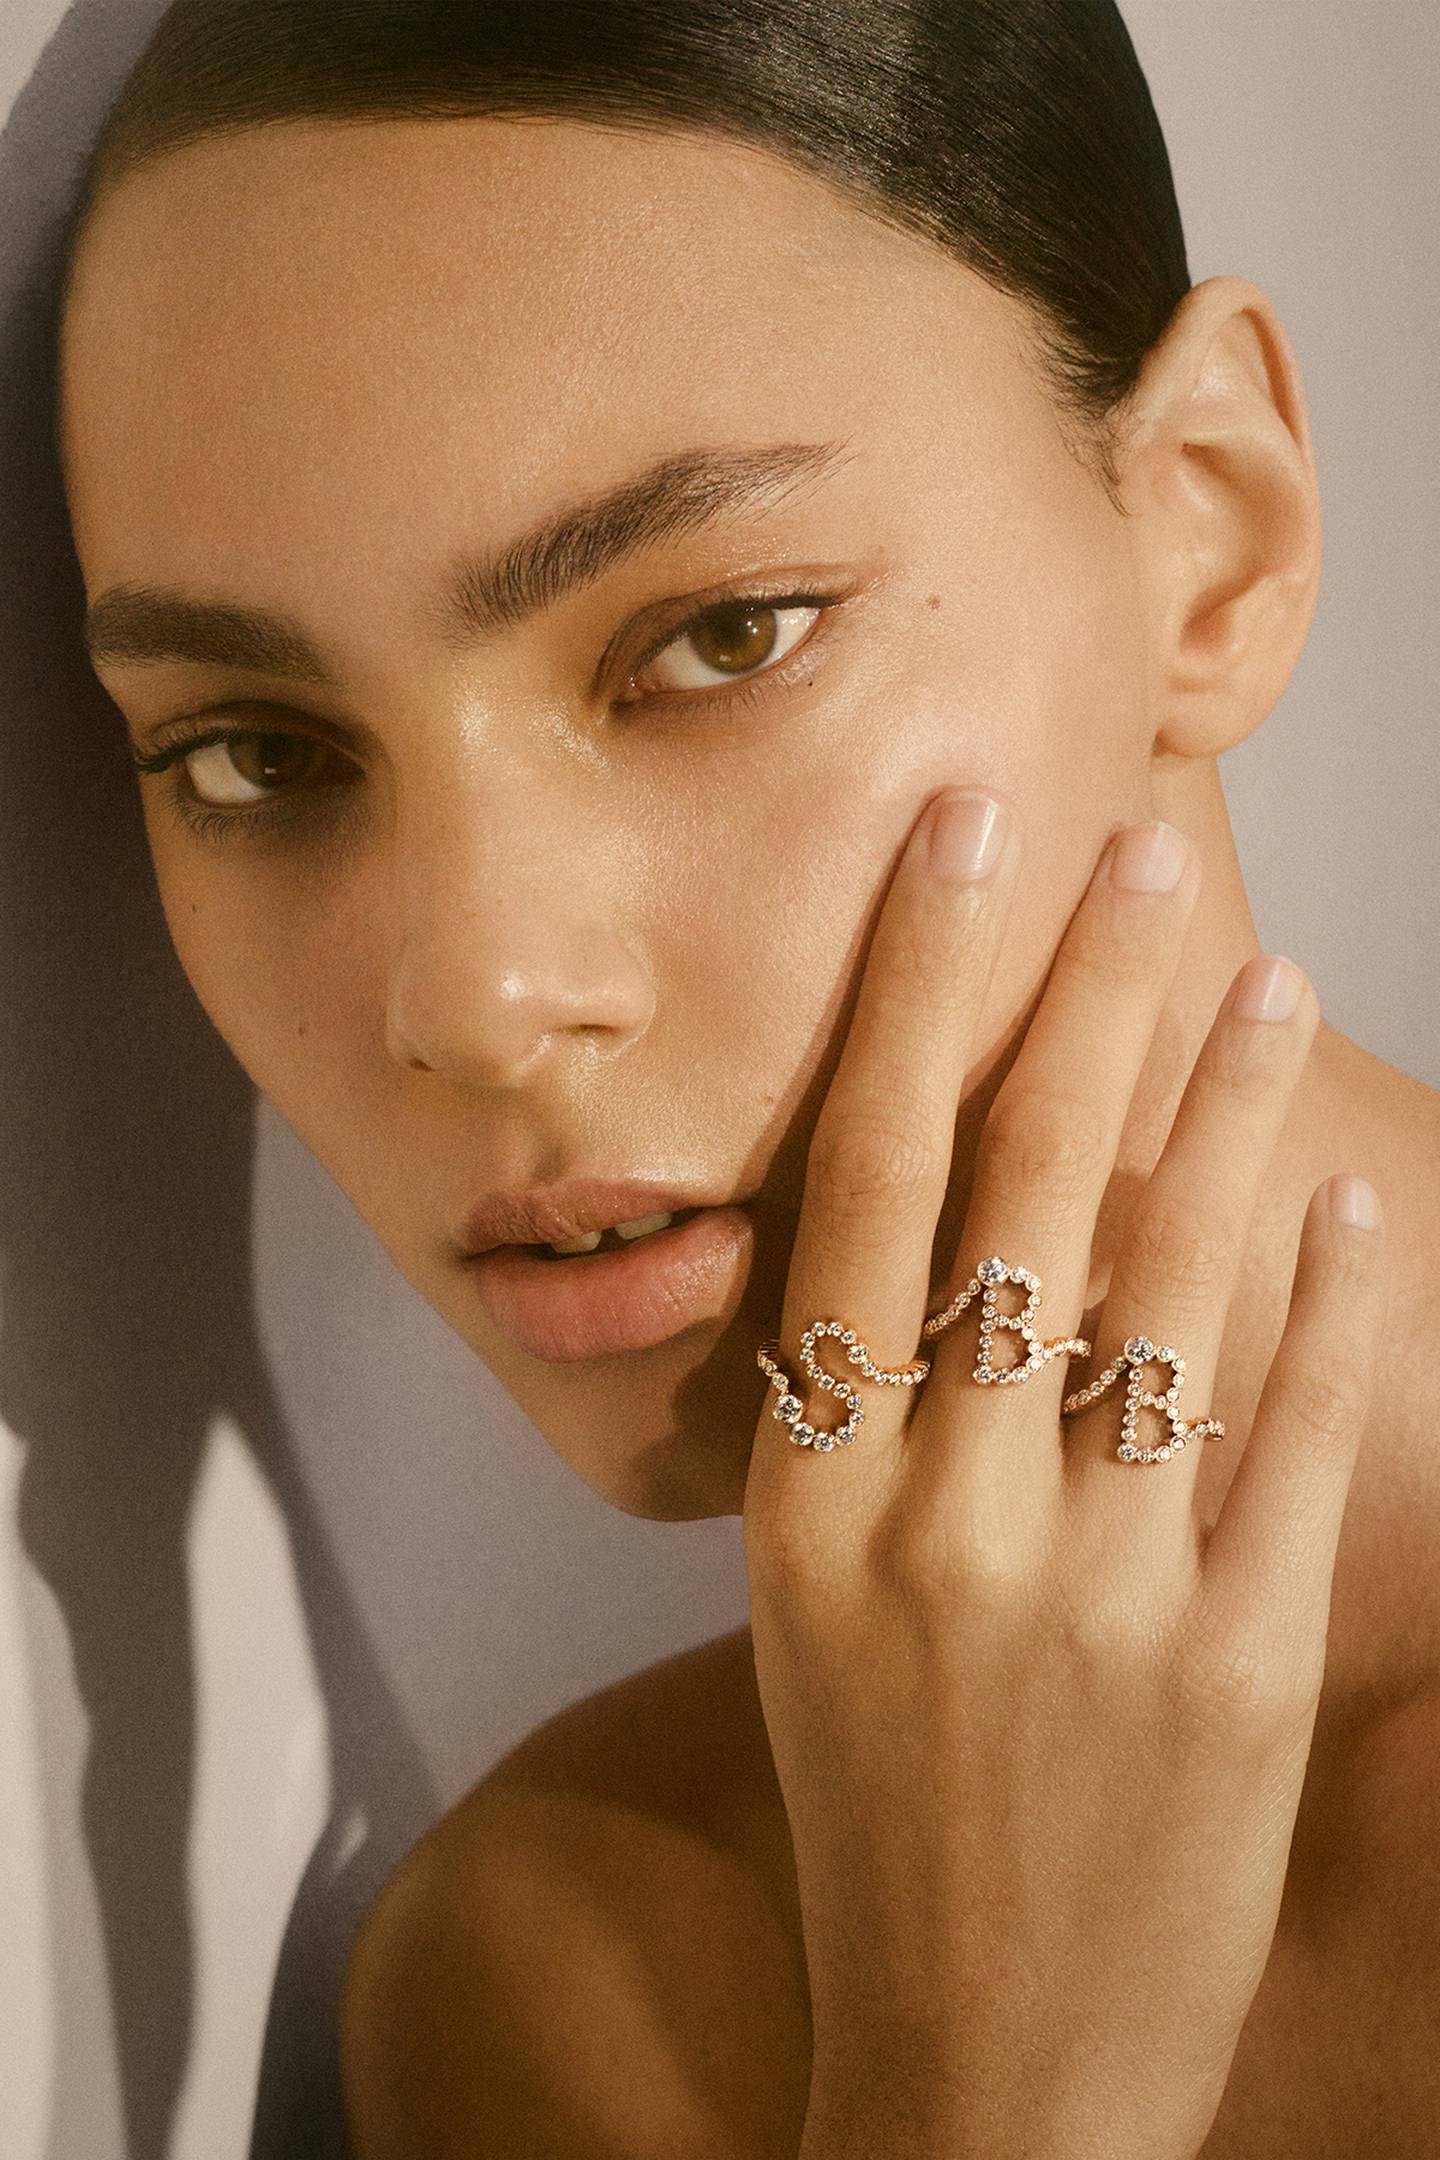 Demand for Sophie Bille Brah's diamond jewellery has surged since the pandemic.